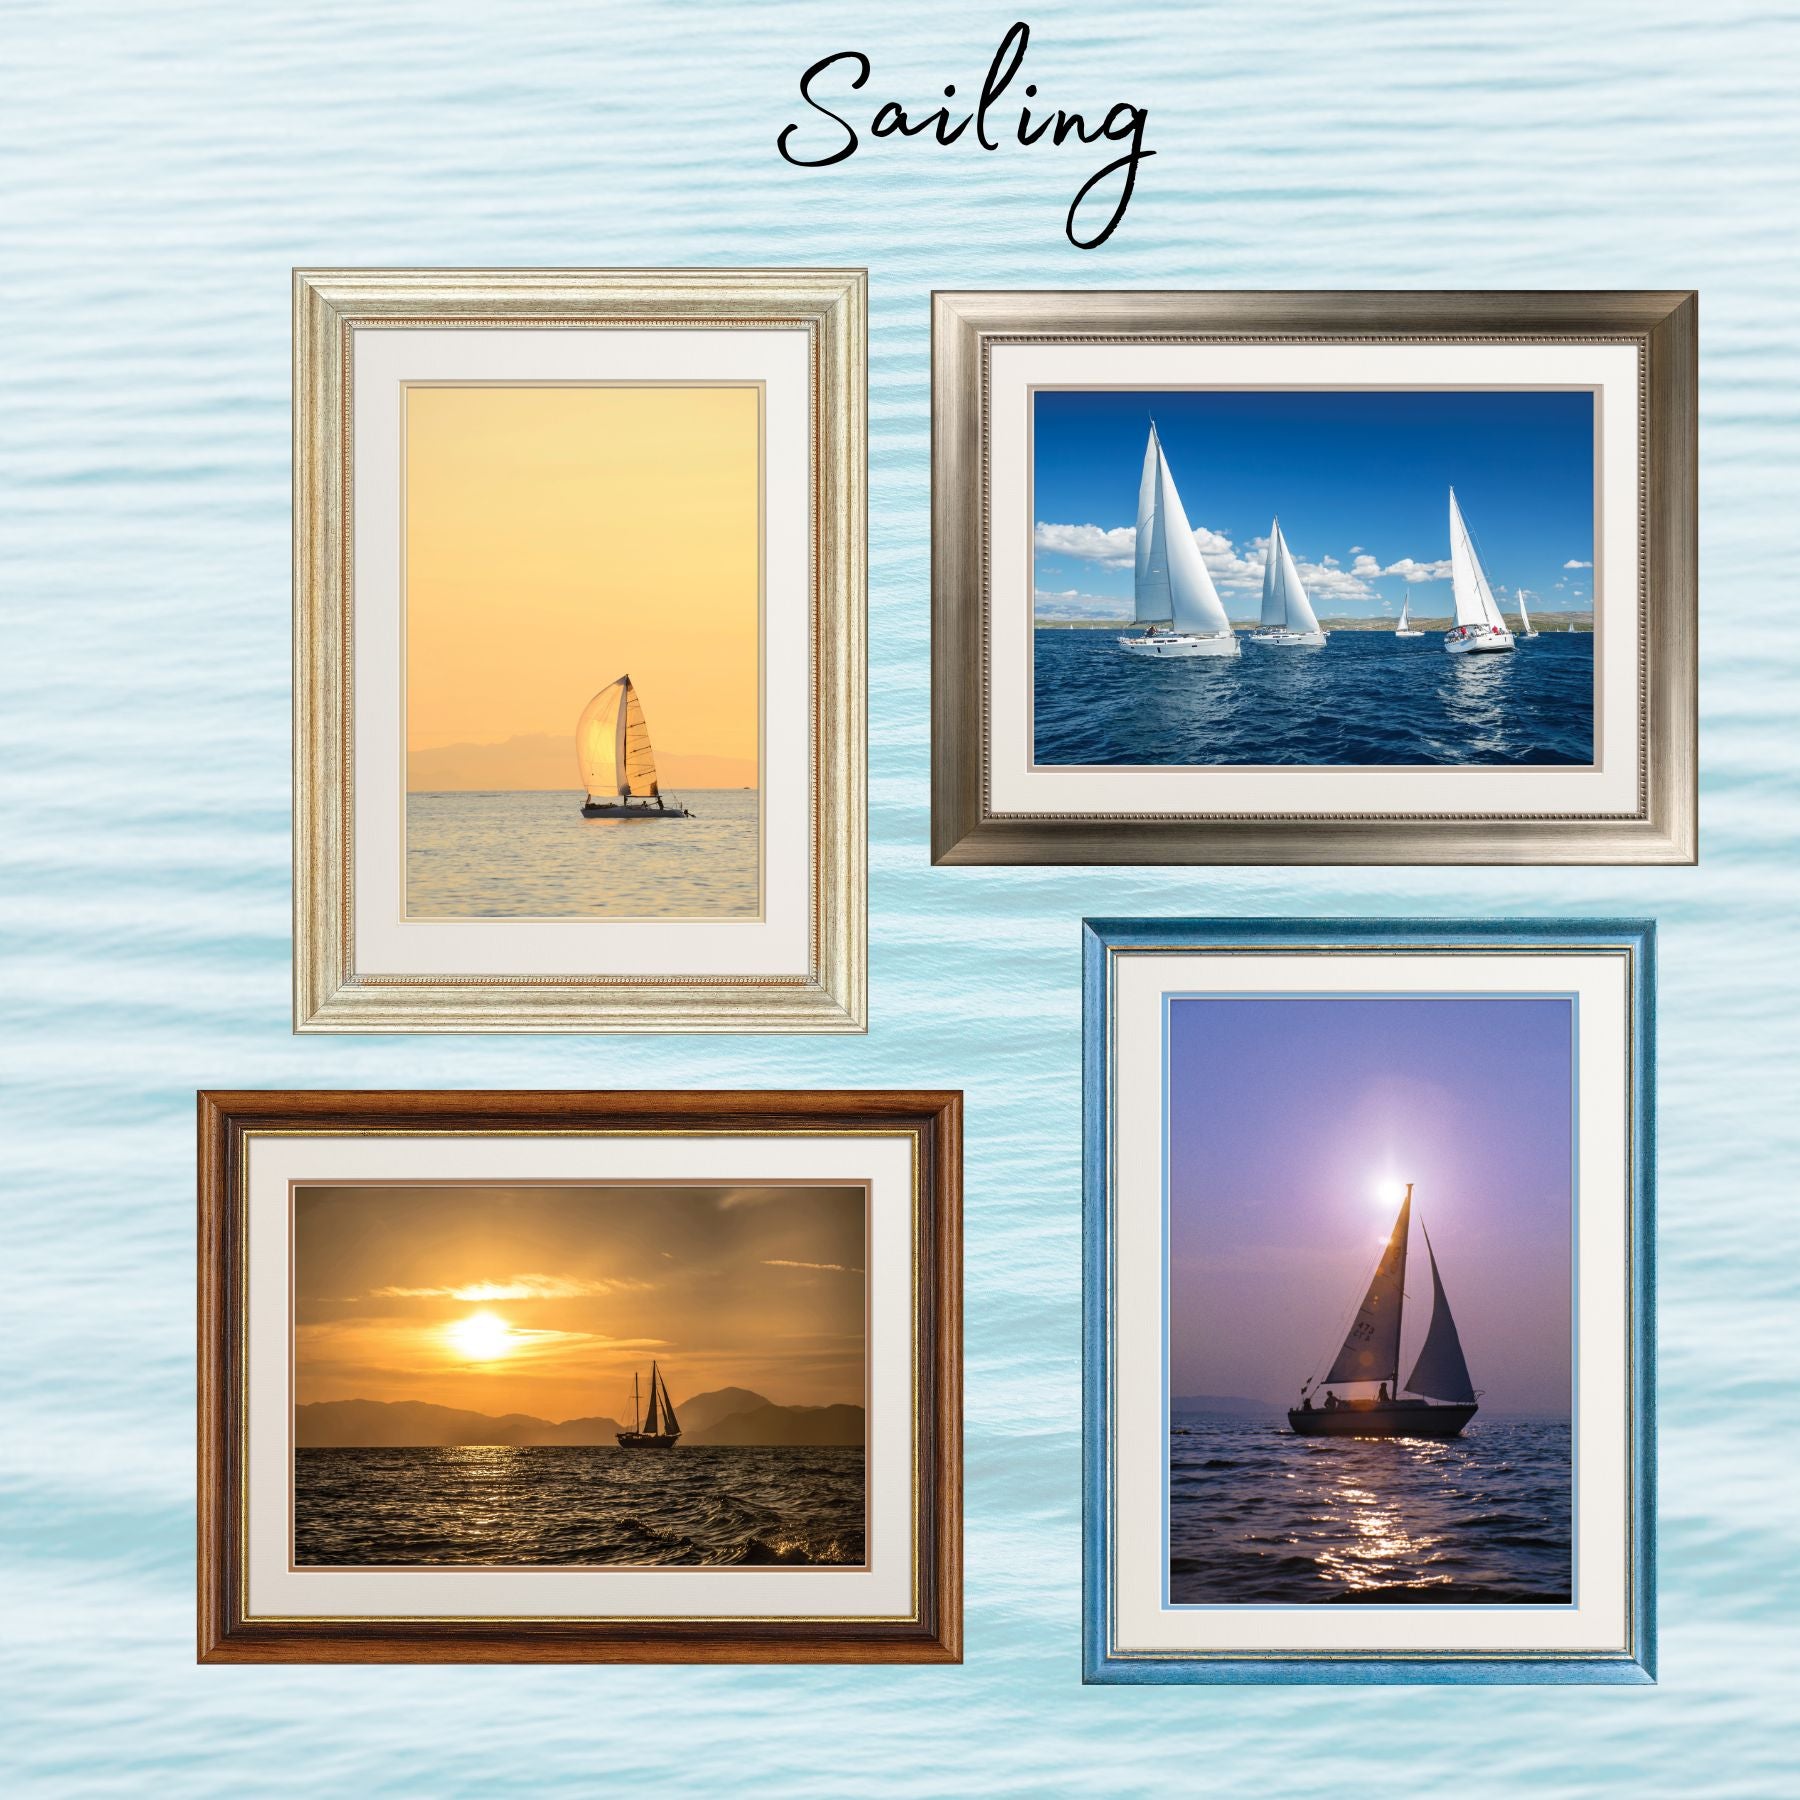 BeMoved by Sailing Posters - Movable & Removable!